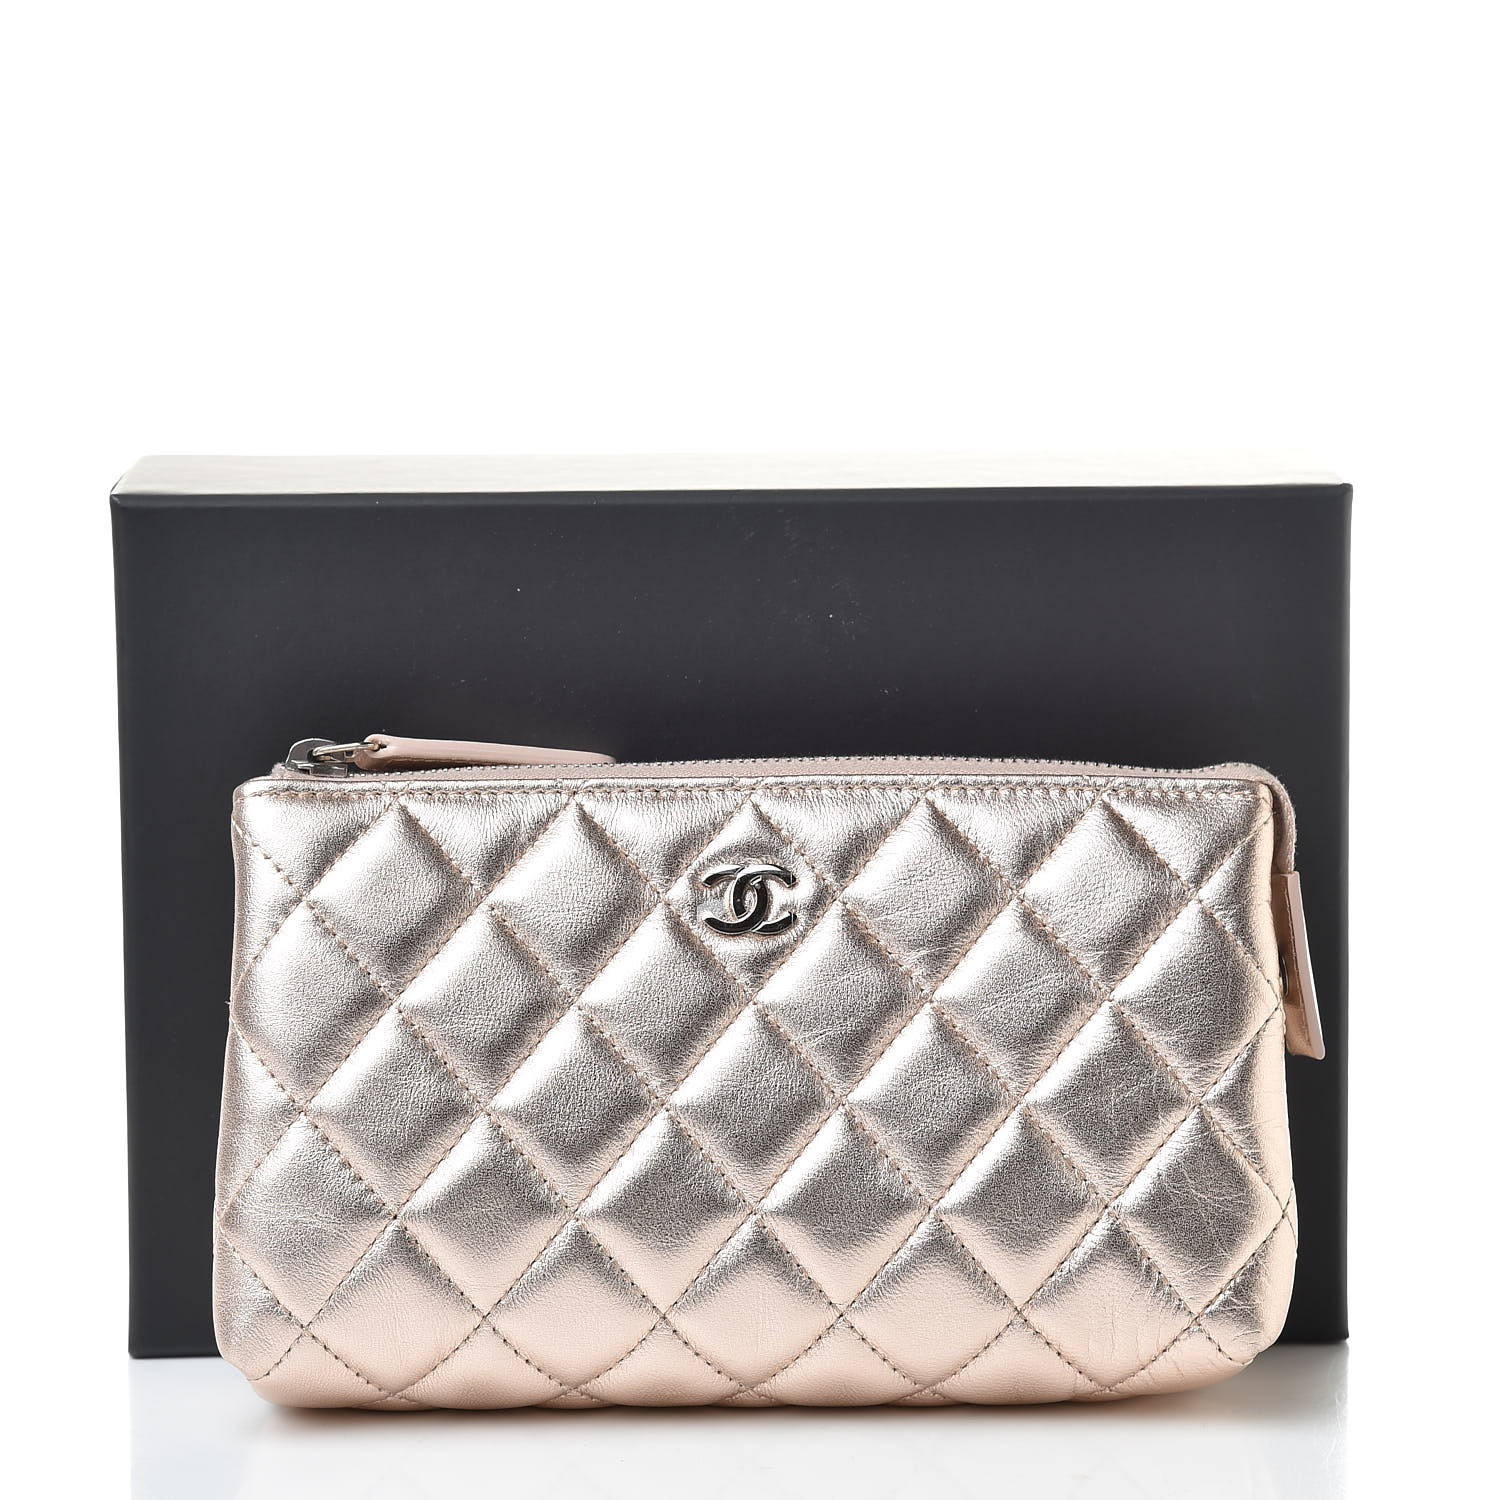 CHANEL Metallic Lambskin Quilted Small Cosmetic Pouch Light Pink 519790